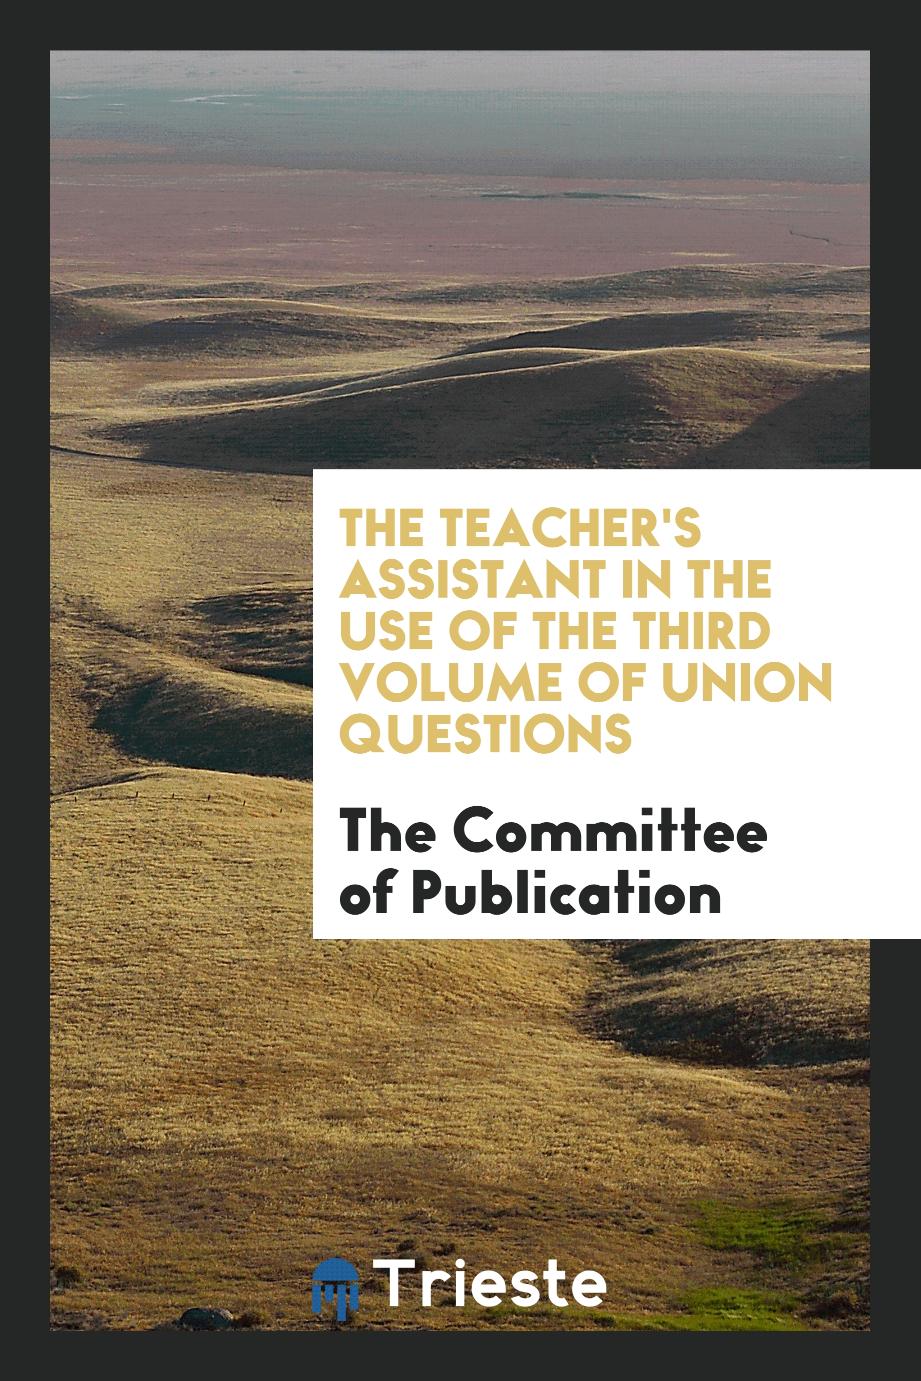 The Teacher's assistant in the use of the third volume of Union questions